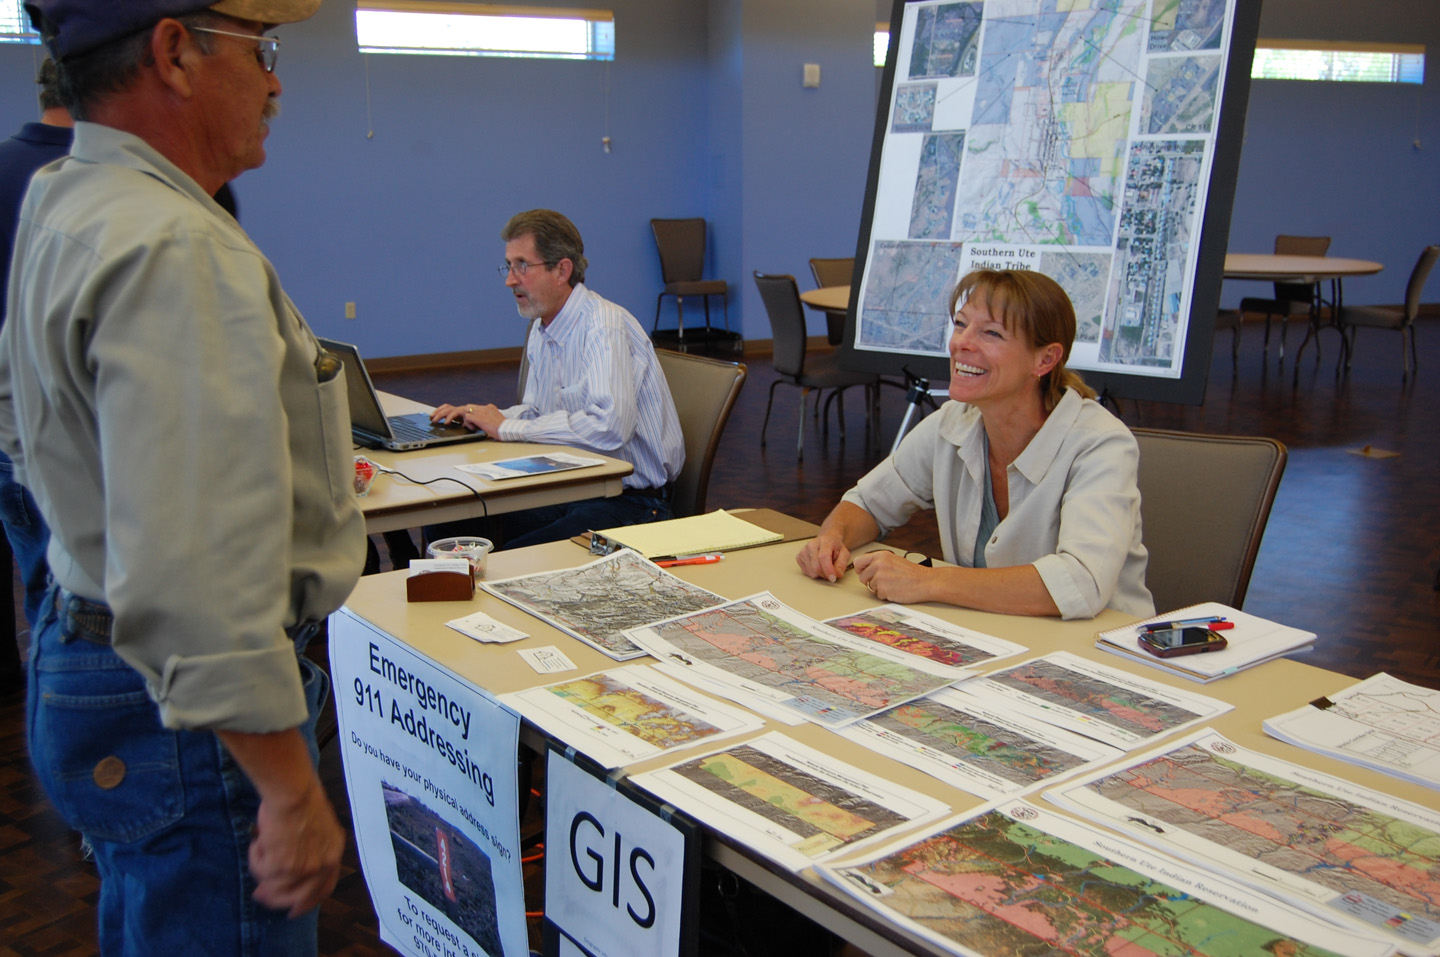 GIS Manager Shelly Riddle discusses her program with a coworker during a Department of Natural Resources Open House